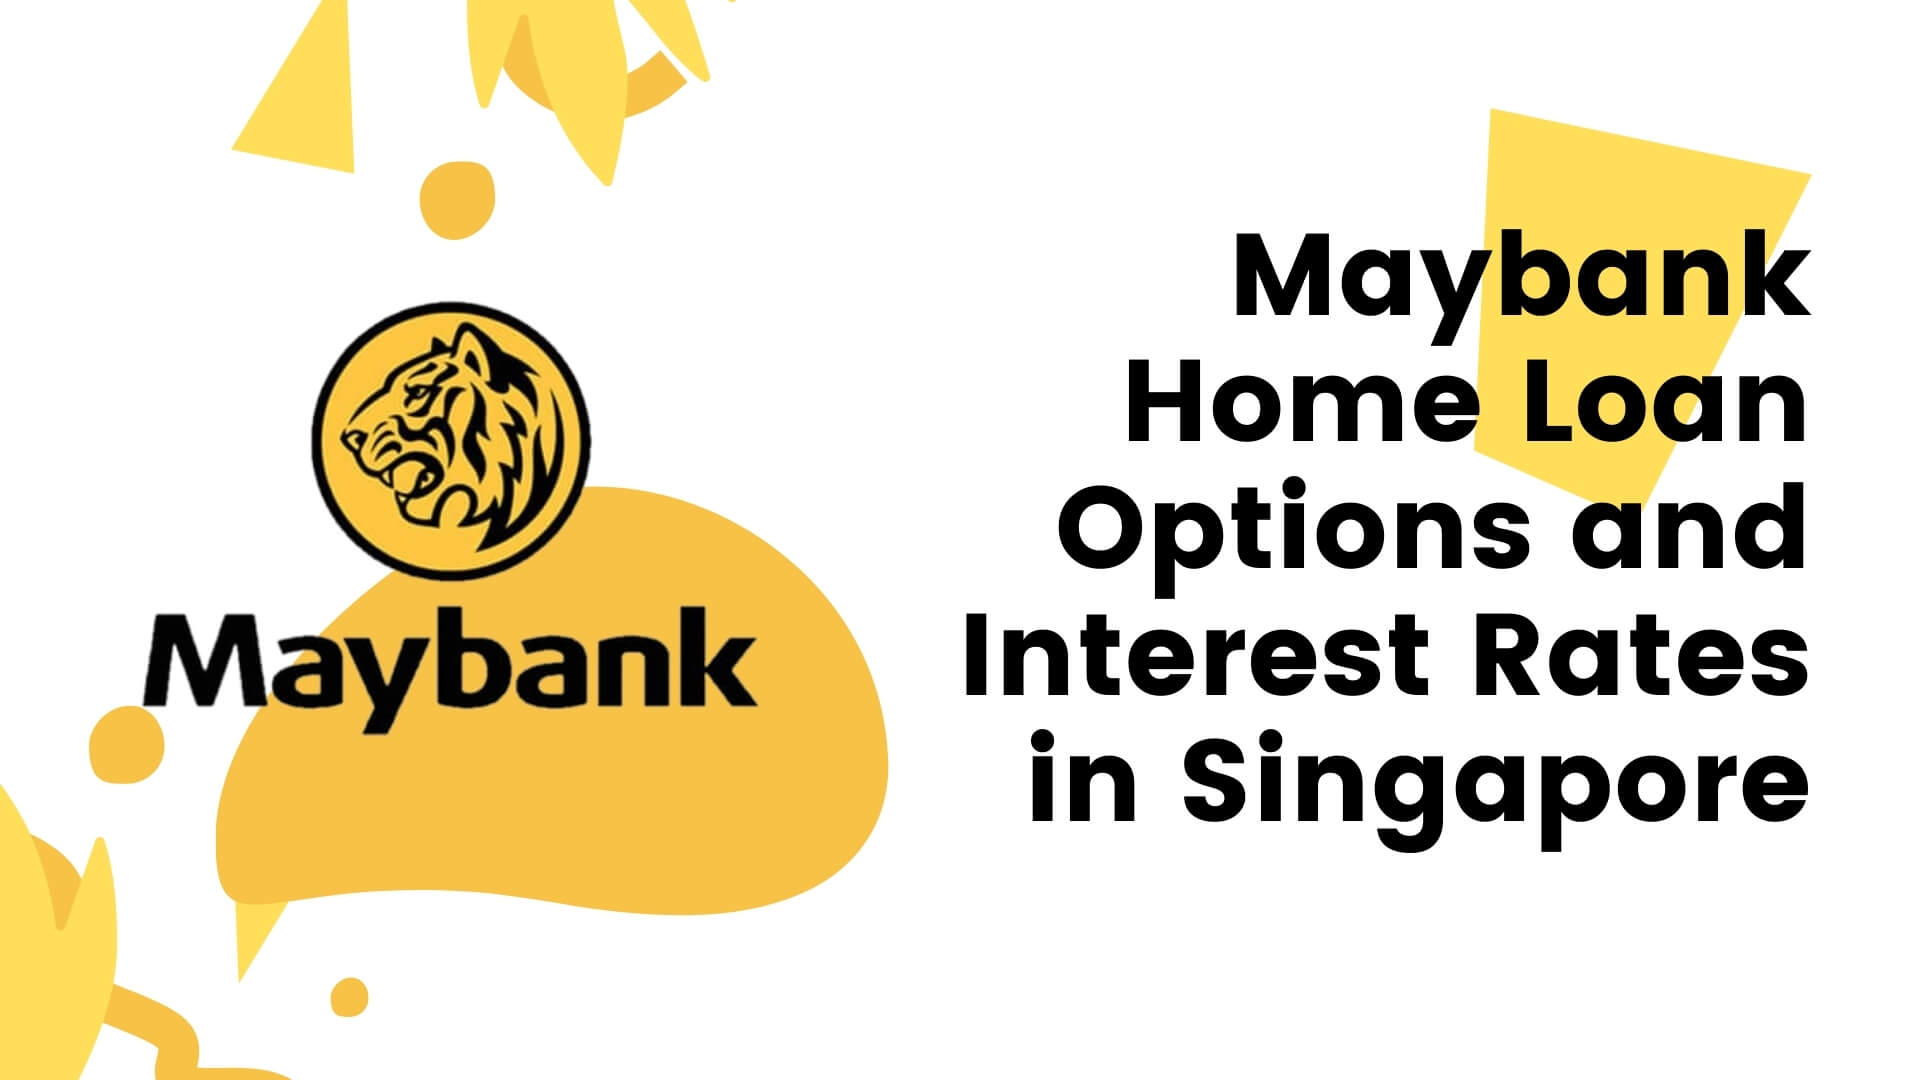 Maybank Home Loan Options and Interest Rates in Singapore